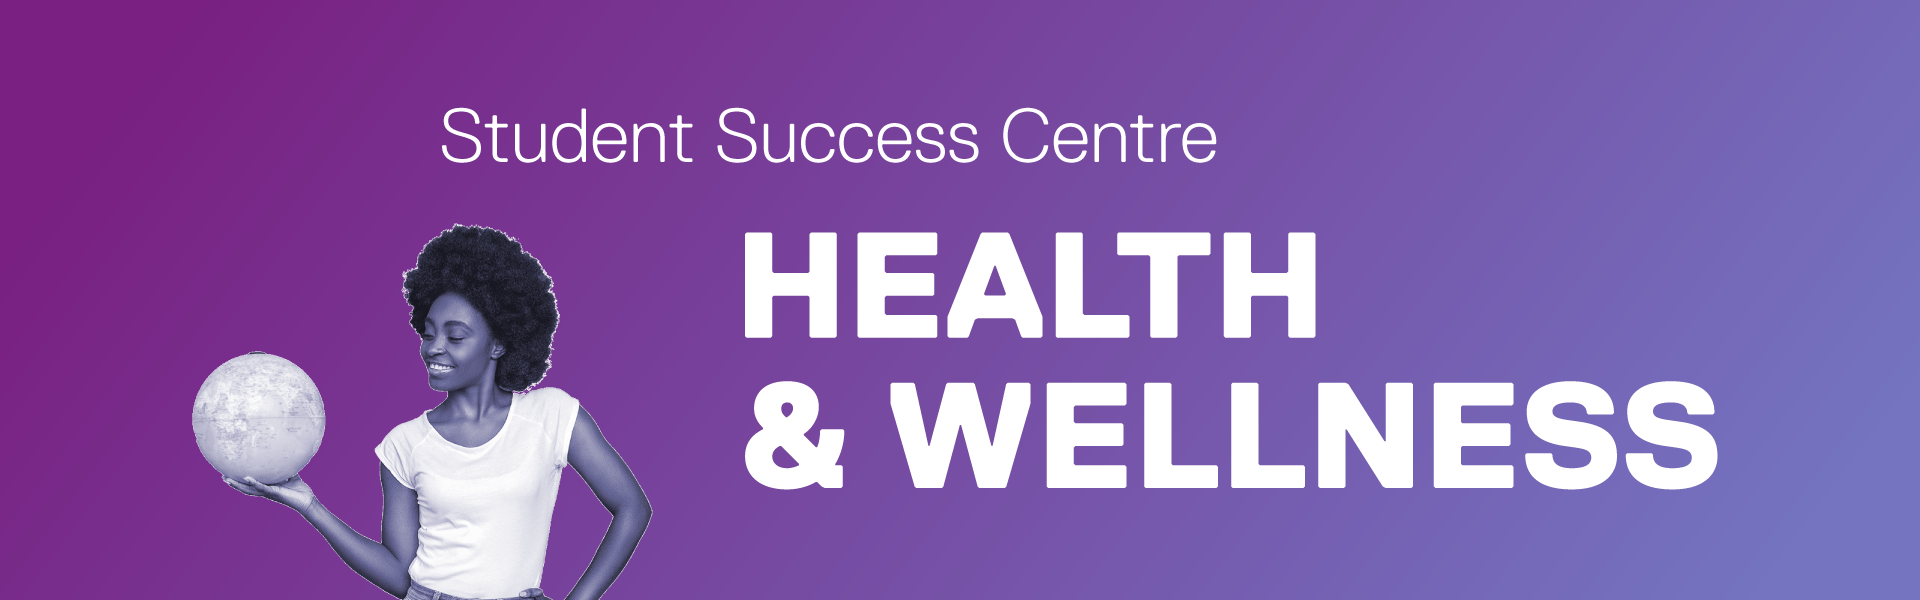 Student Success Centre Health and Wellness is written on a purple gradient with a woman holding a globe on the left